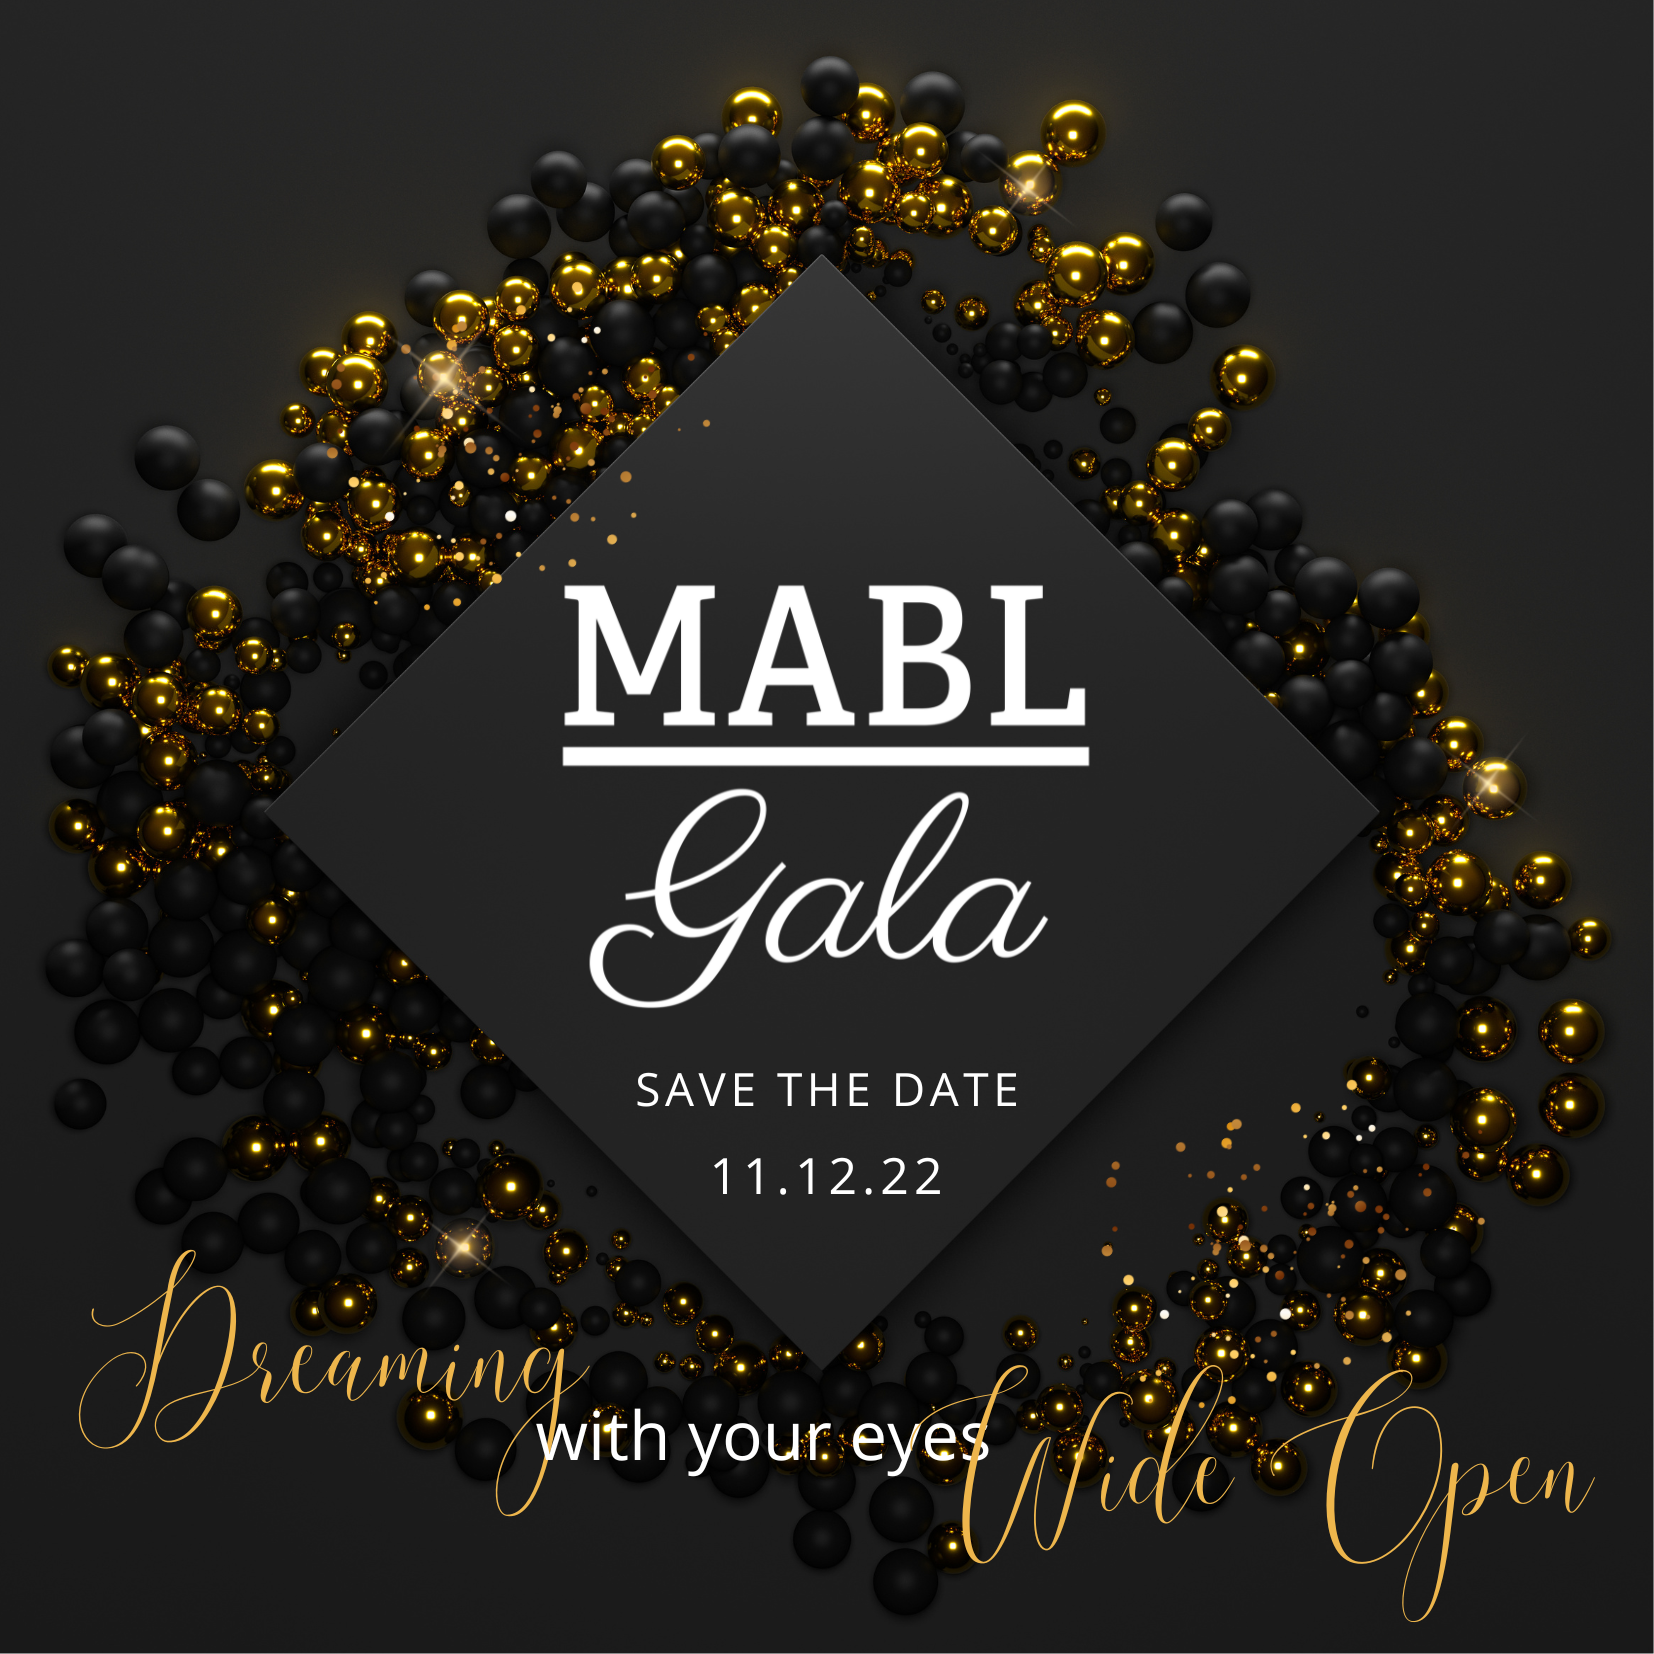 Save the Date for MABL's 2022 Scholarship Gala: November 12, 2022